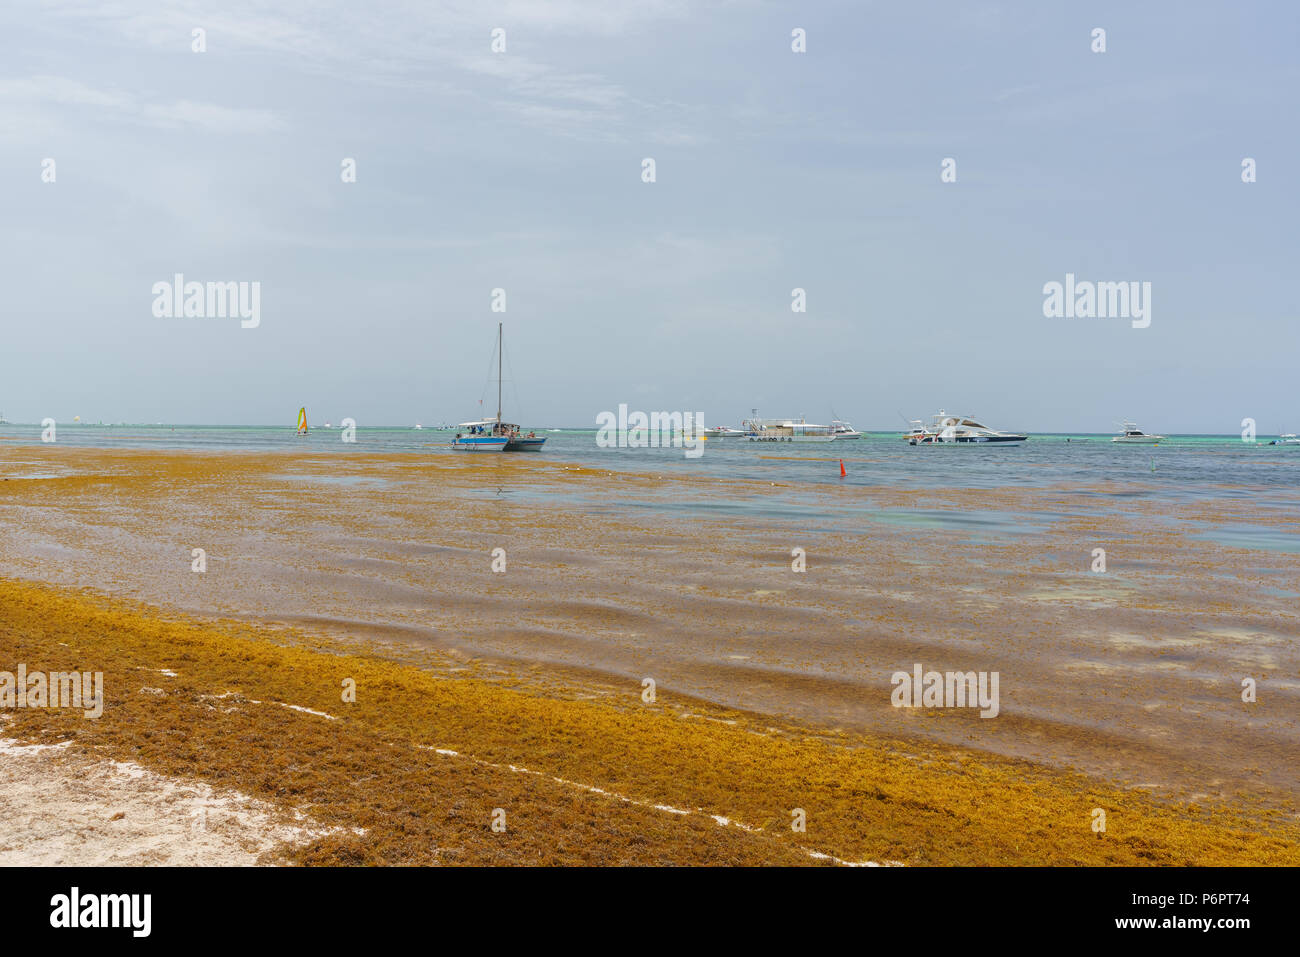 Punta Cana, Dominican Republic - June 24, 2018: sargassum seaweeds on the beaytiful ocean beach in Bavaro, Punta Cana, the result of global warming climate change. Stock Photo